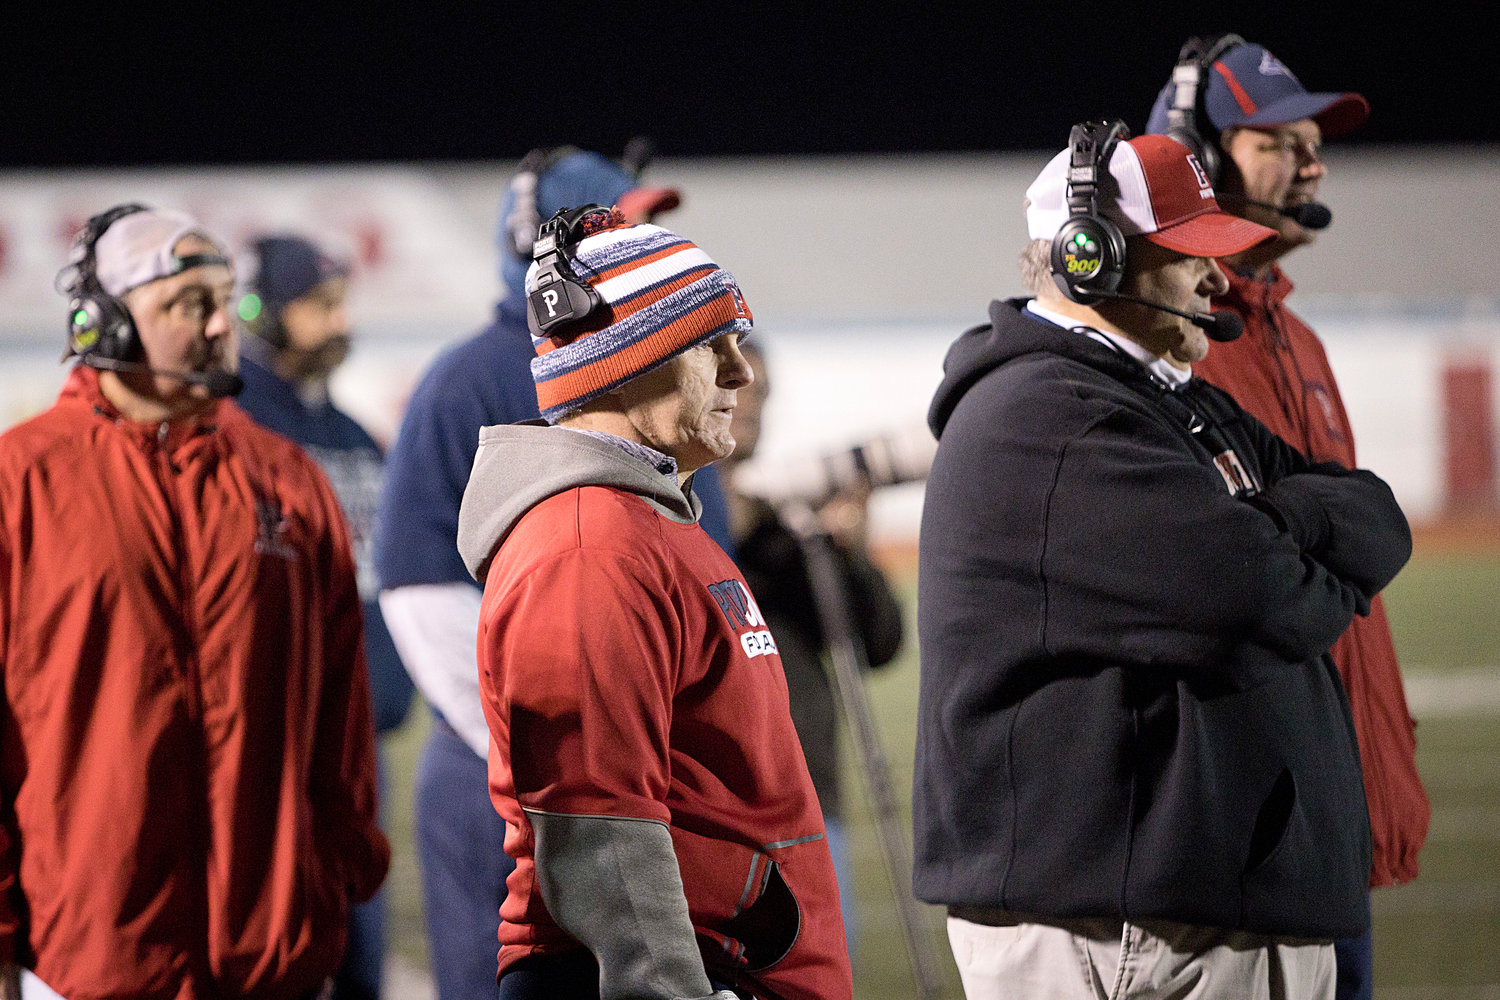 Head coach Dustin Almeida (center) looks on with the rest of his staff on Friday night.